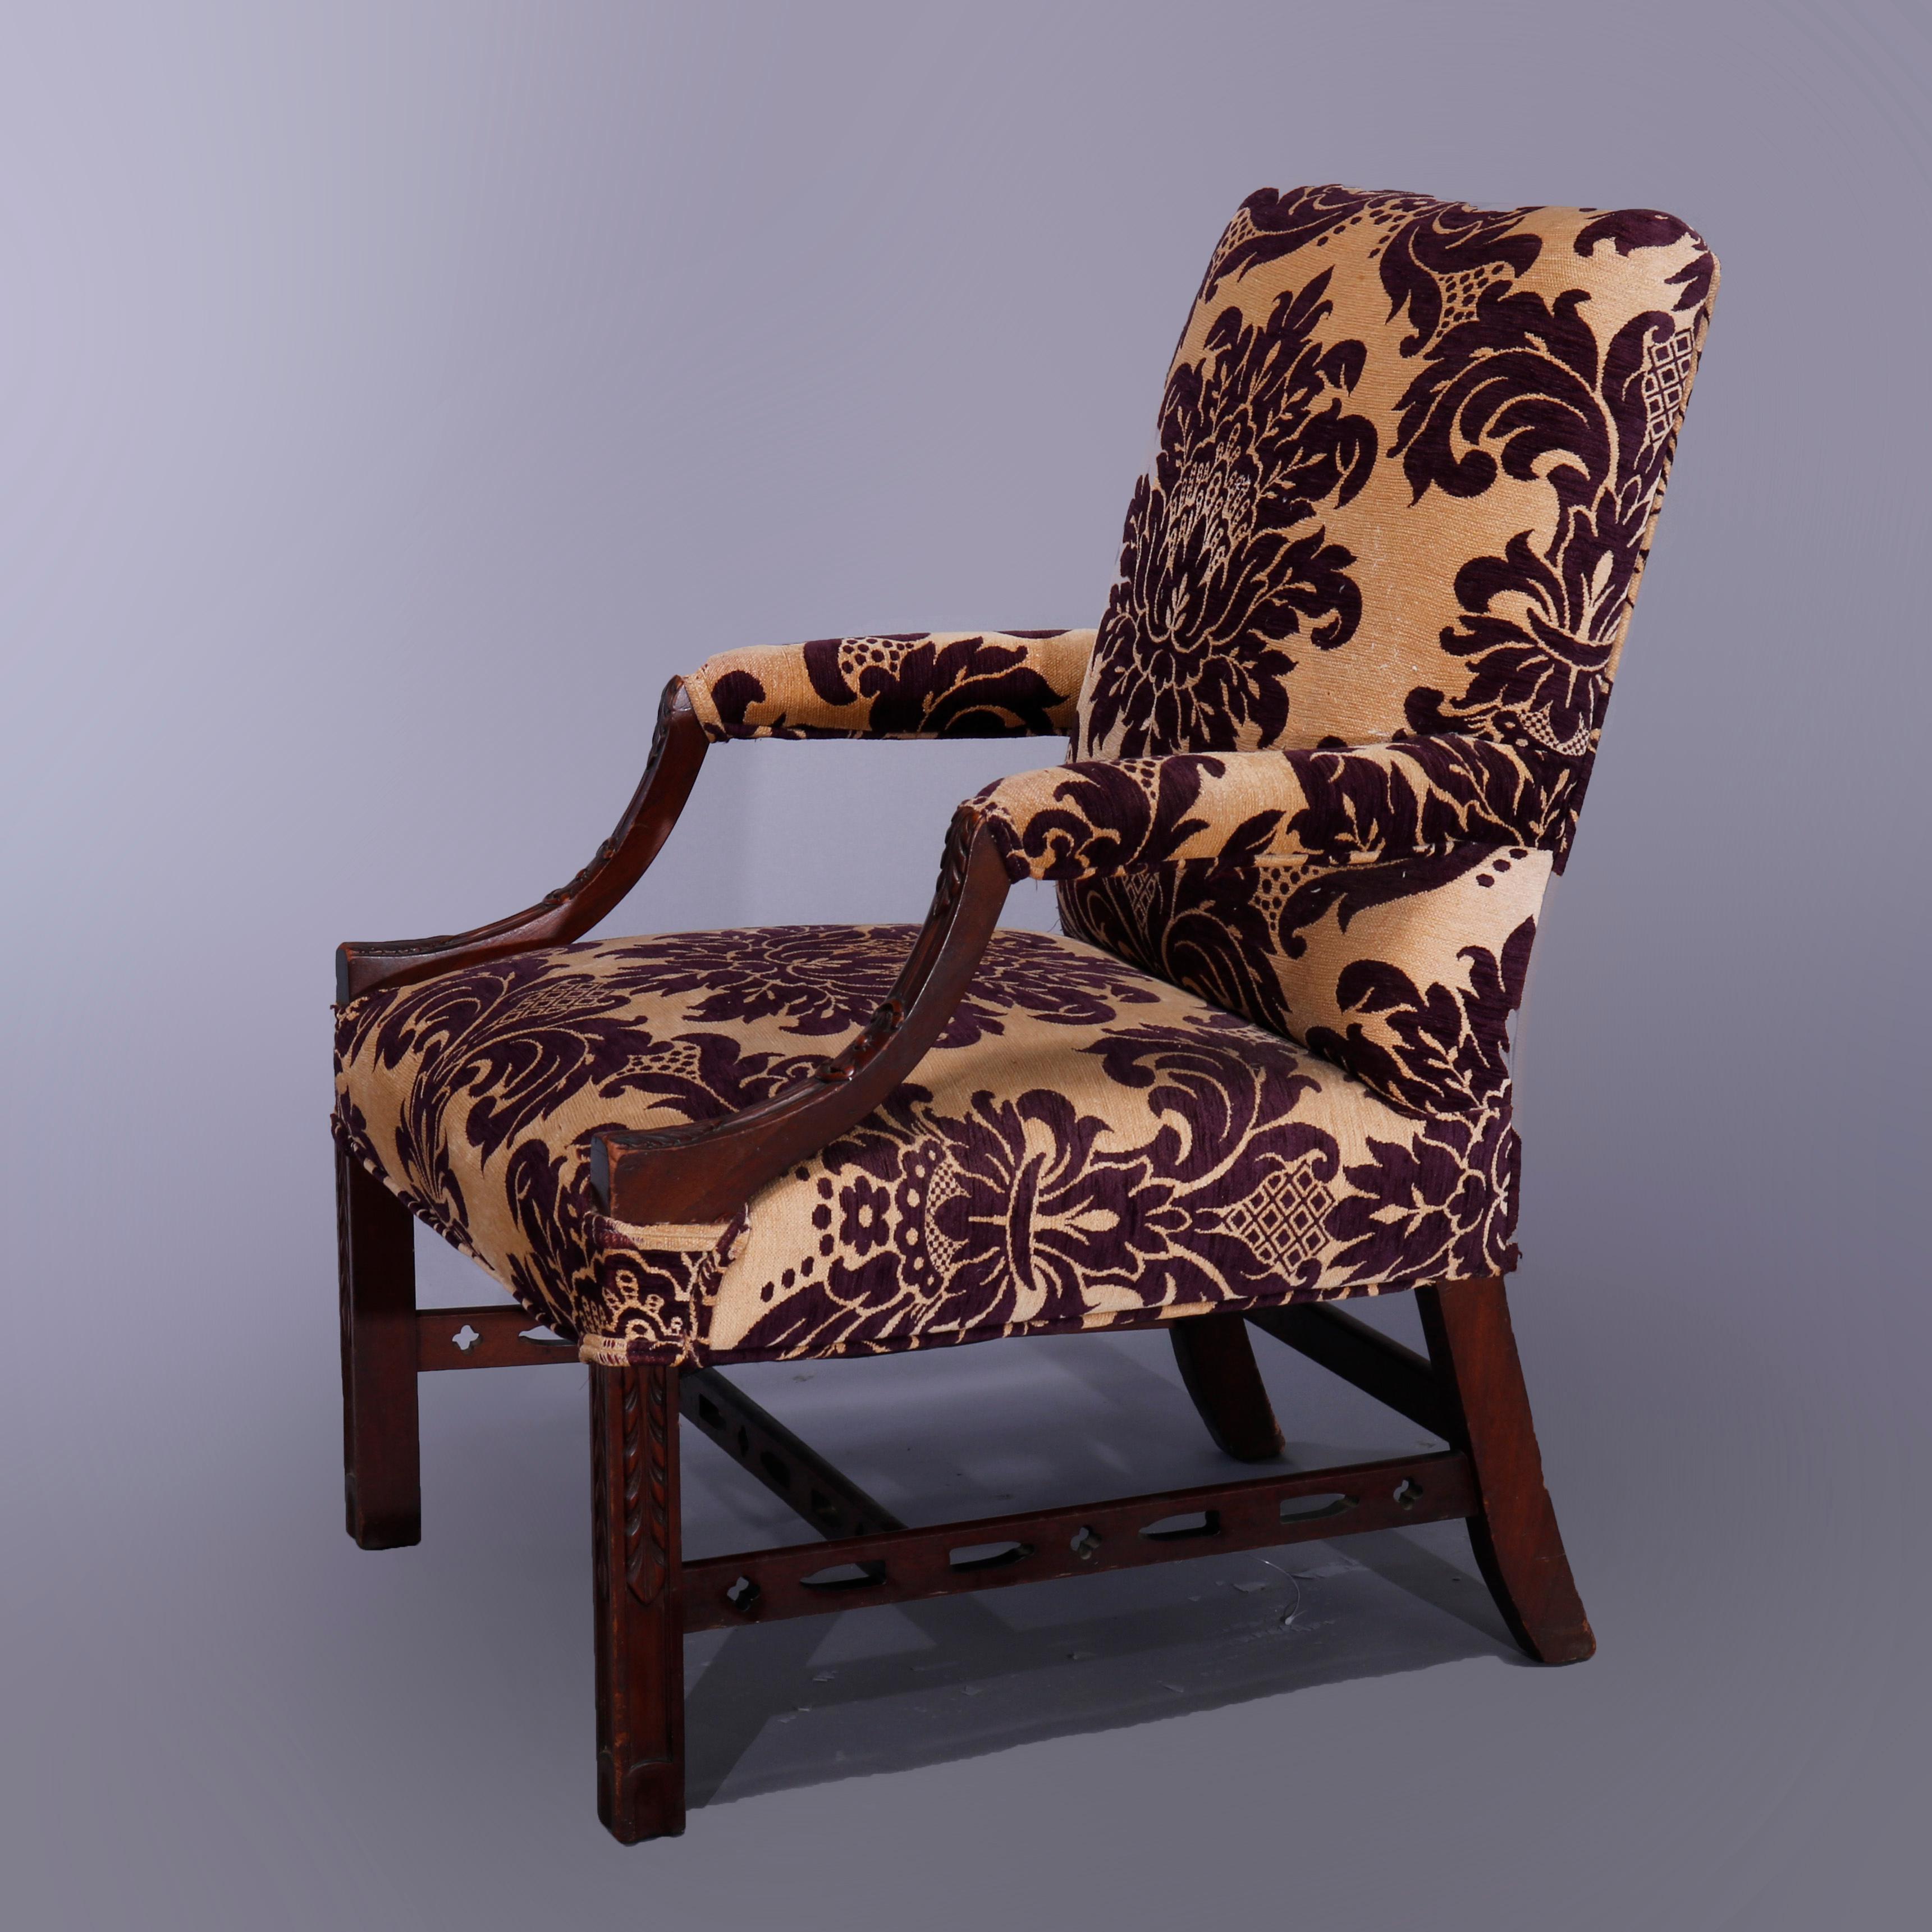 An antique English Georgian style lolling armchair offers mahogany frame having upholstered back, seat and arms with convex supports, raised on straight and square legs, c1920

Measures: 38.5